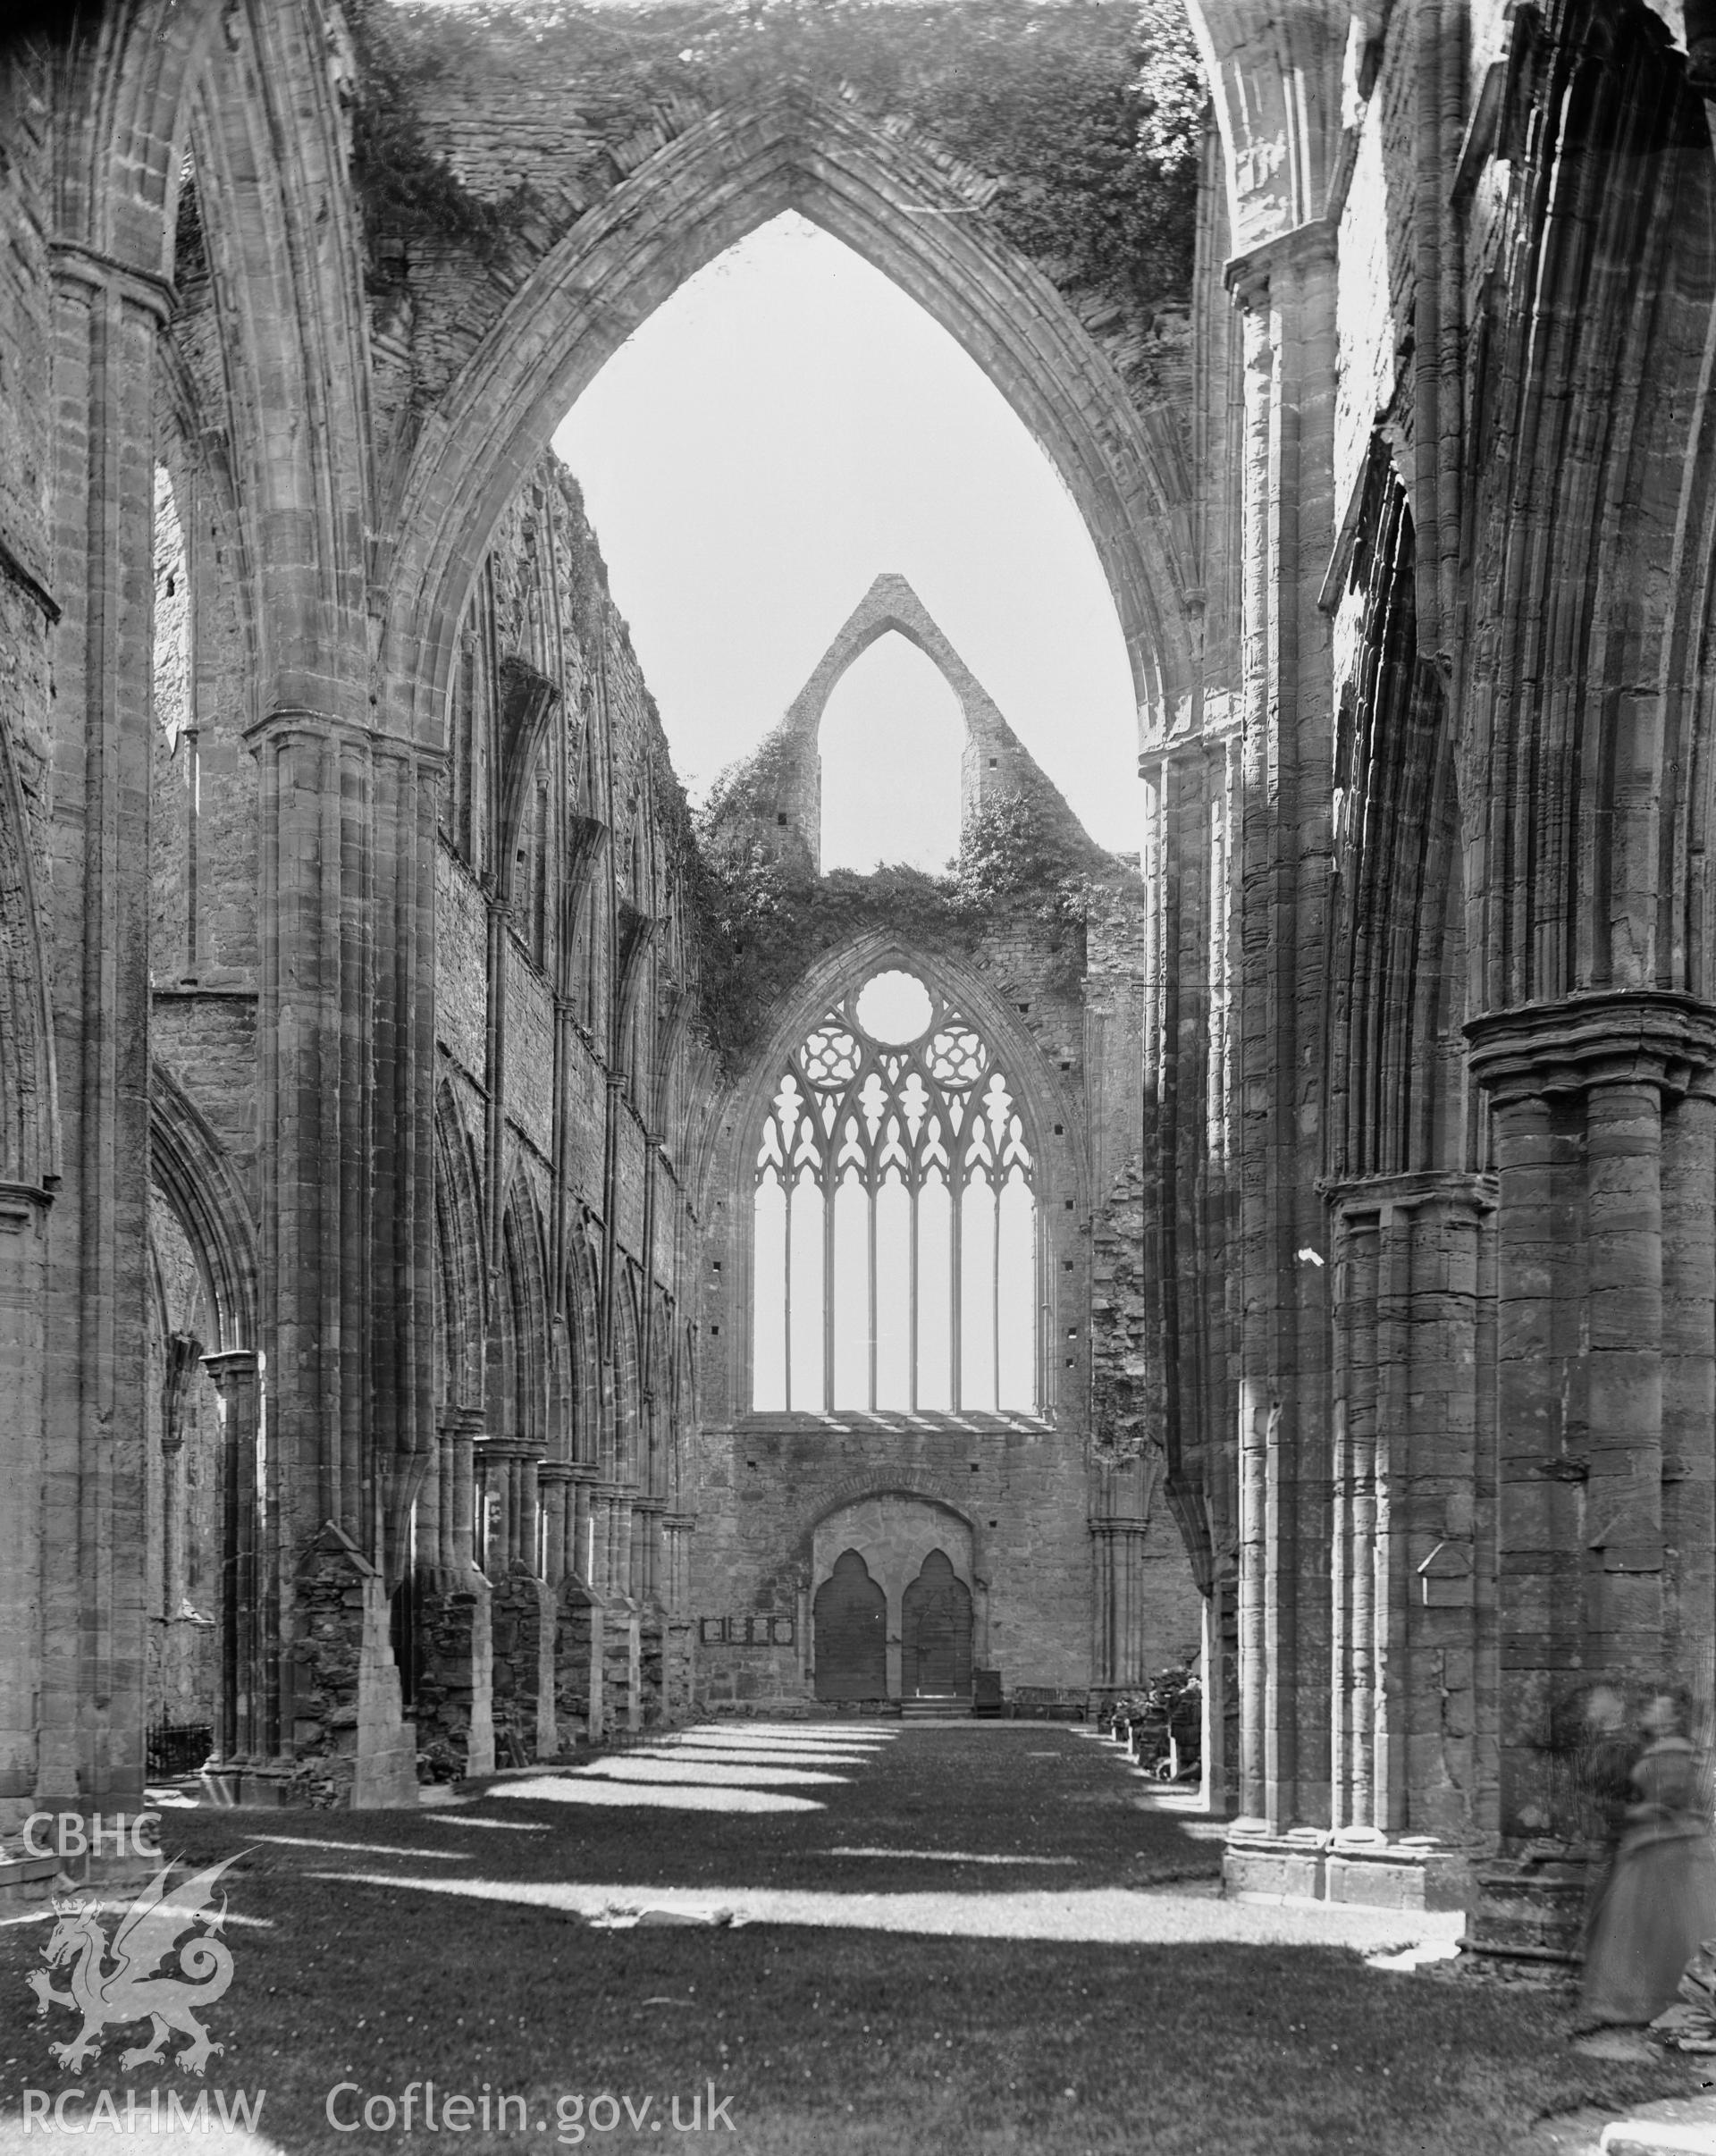 Tintern Abbey crossing and nave from E. No accession number